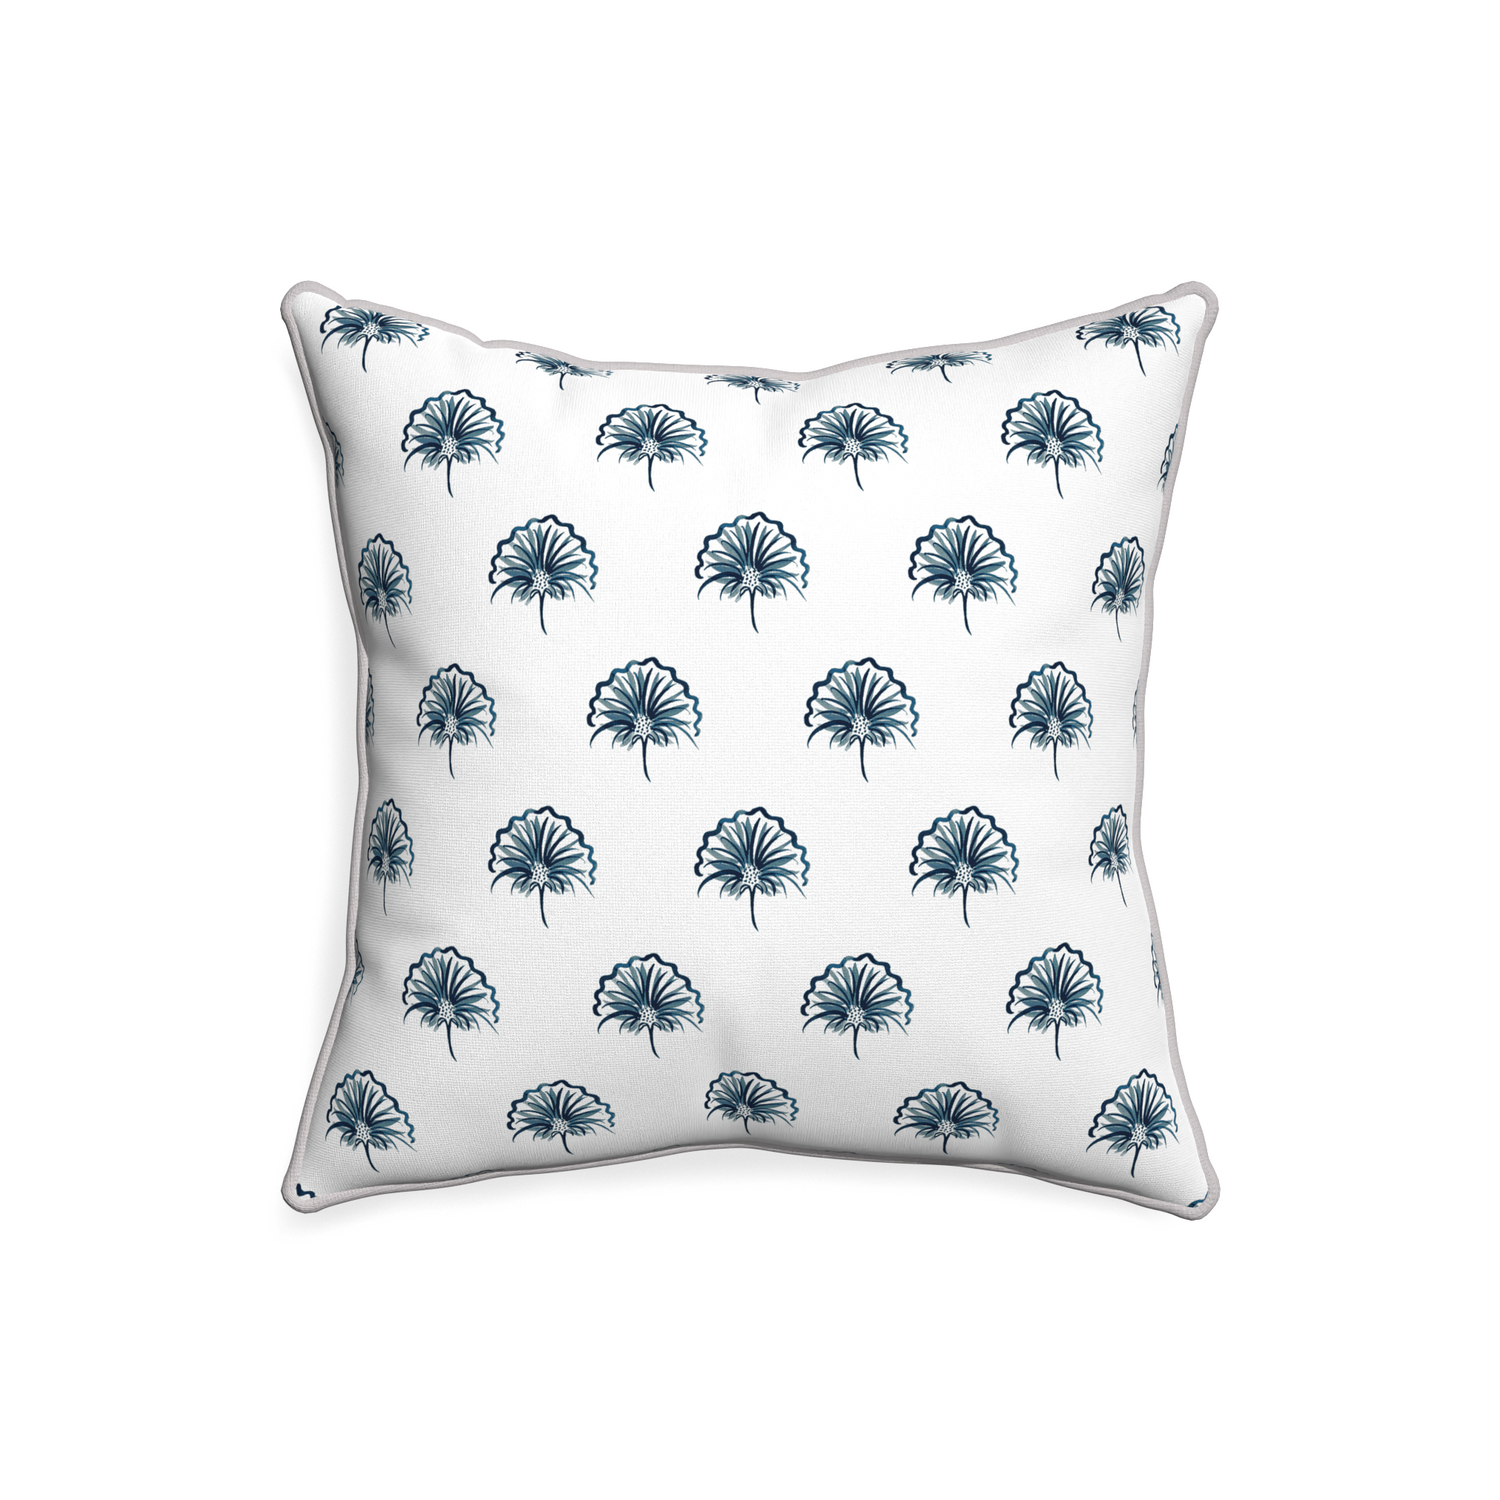 20-square penelope midnight custom floral navypillow with pebble piping on white background